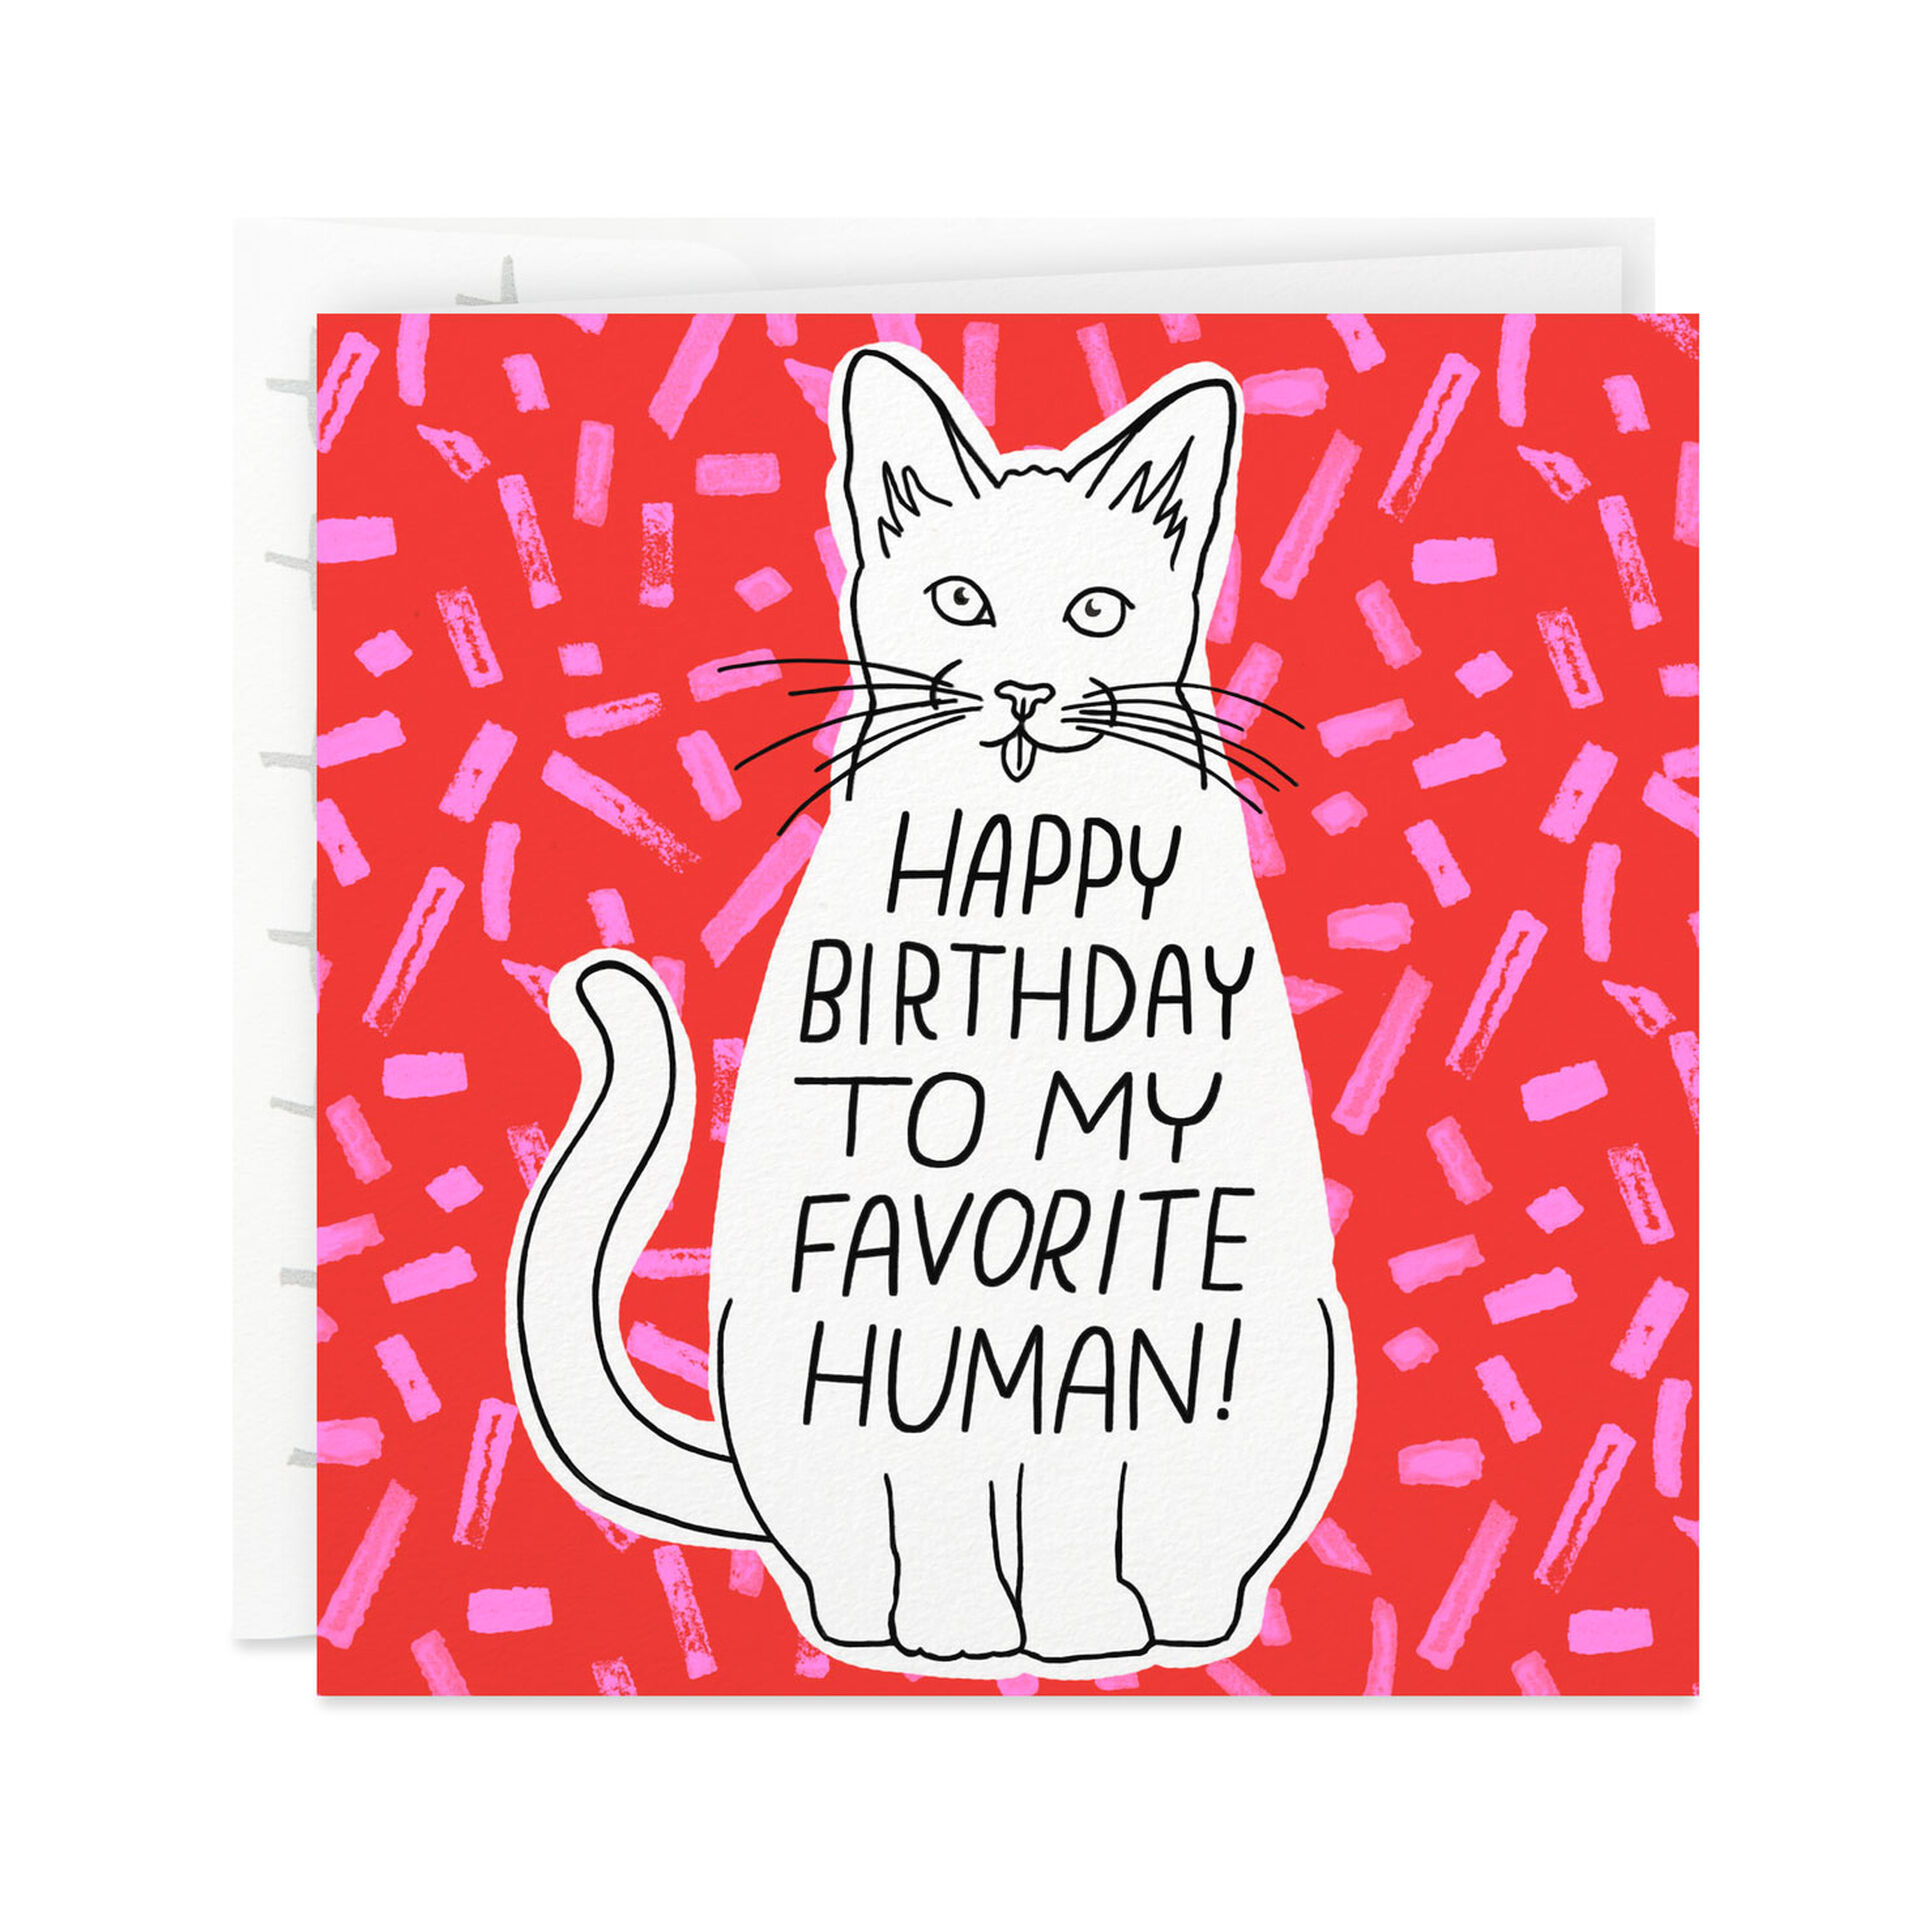 Illustrated-Kitty-Birthday-Card-From-the-Cat_359YYB1179_01